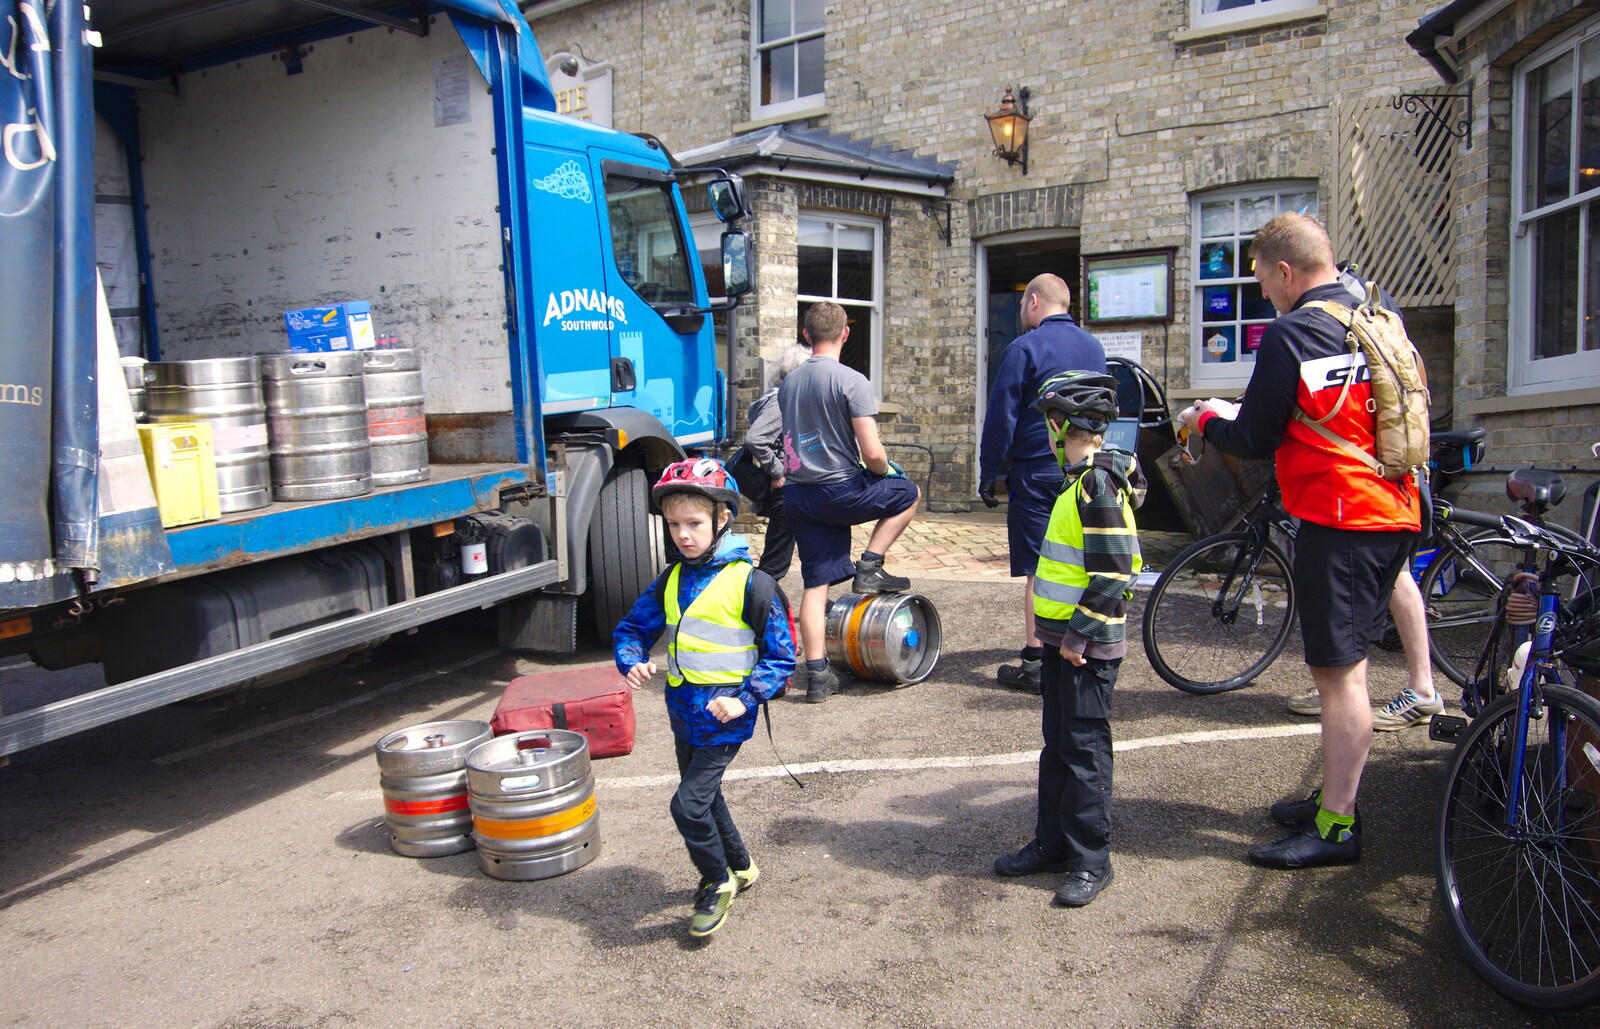 Harry walks past the beer lorry from The BSCC Bike Ride 2019, Coggeshall, Essex - 11th May 2019